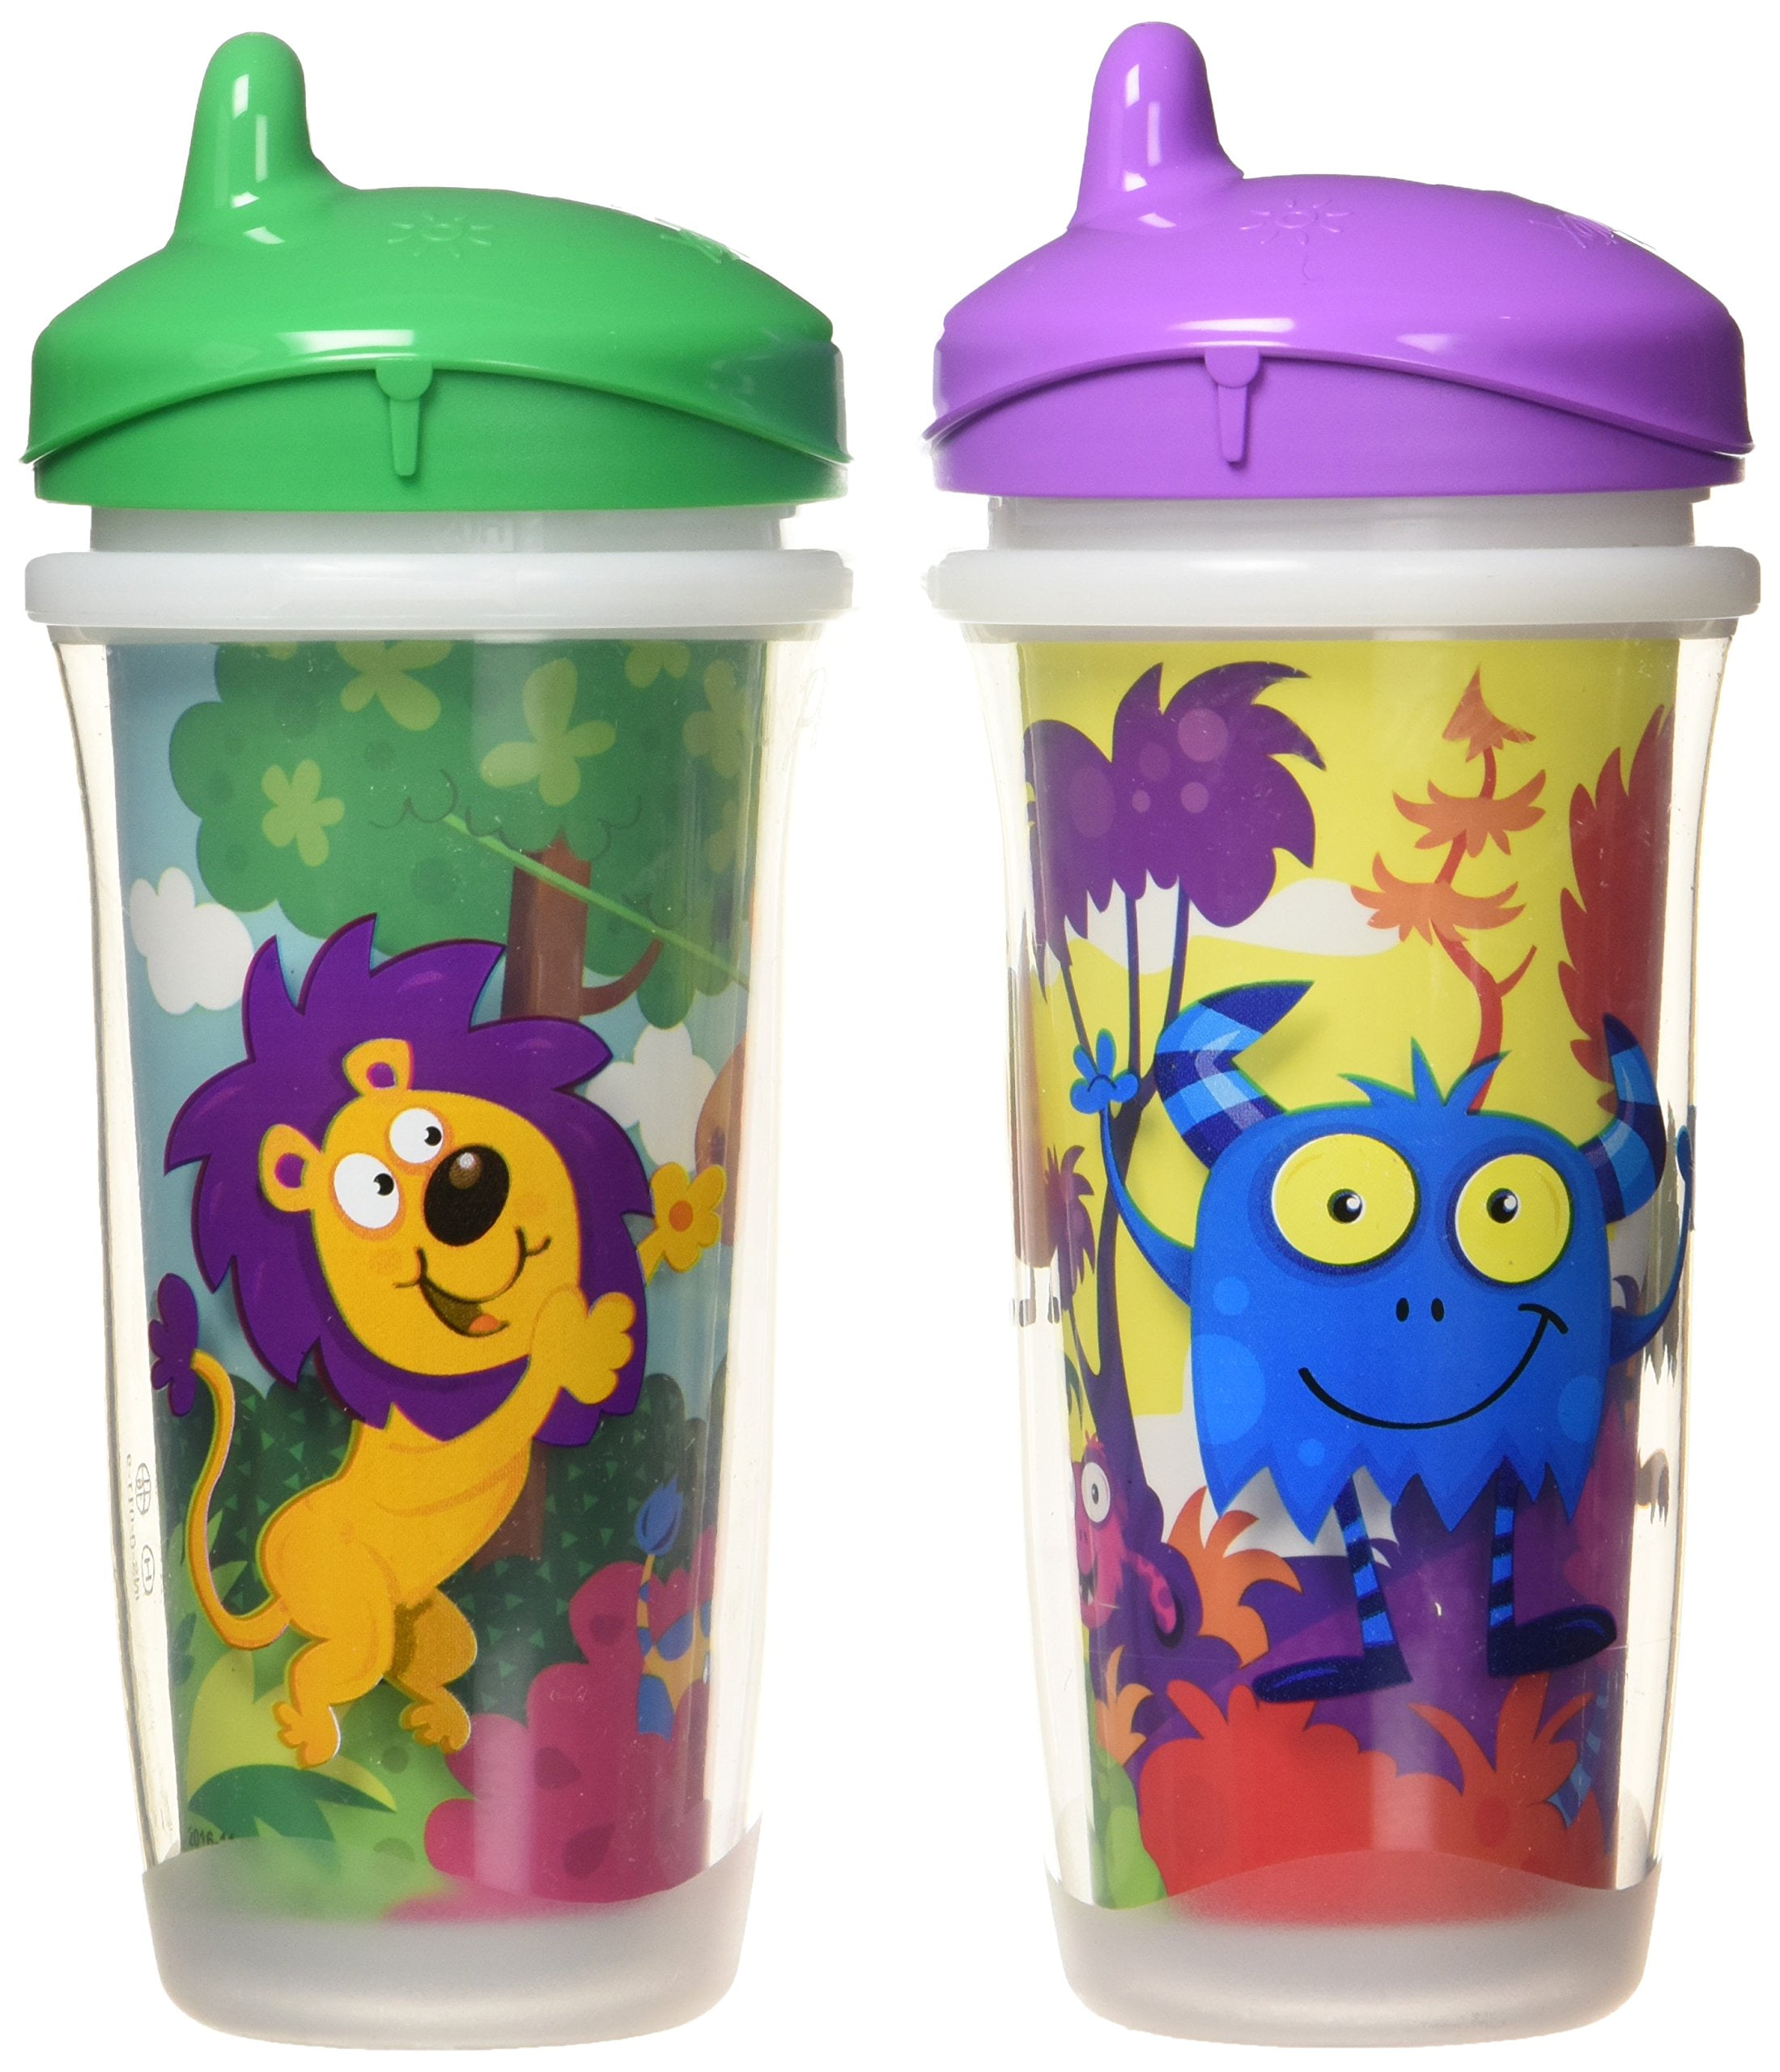 Playtex Baby Sipsters Stage 3 Milk & Water Insulated Straw Sippy Cups, 9  oz, 2 pk 